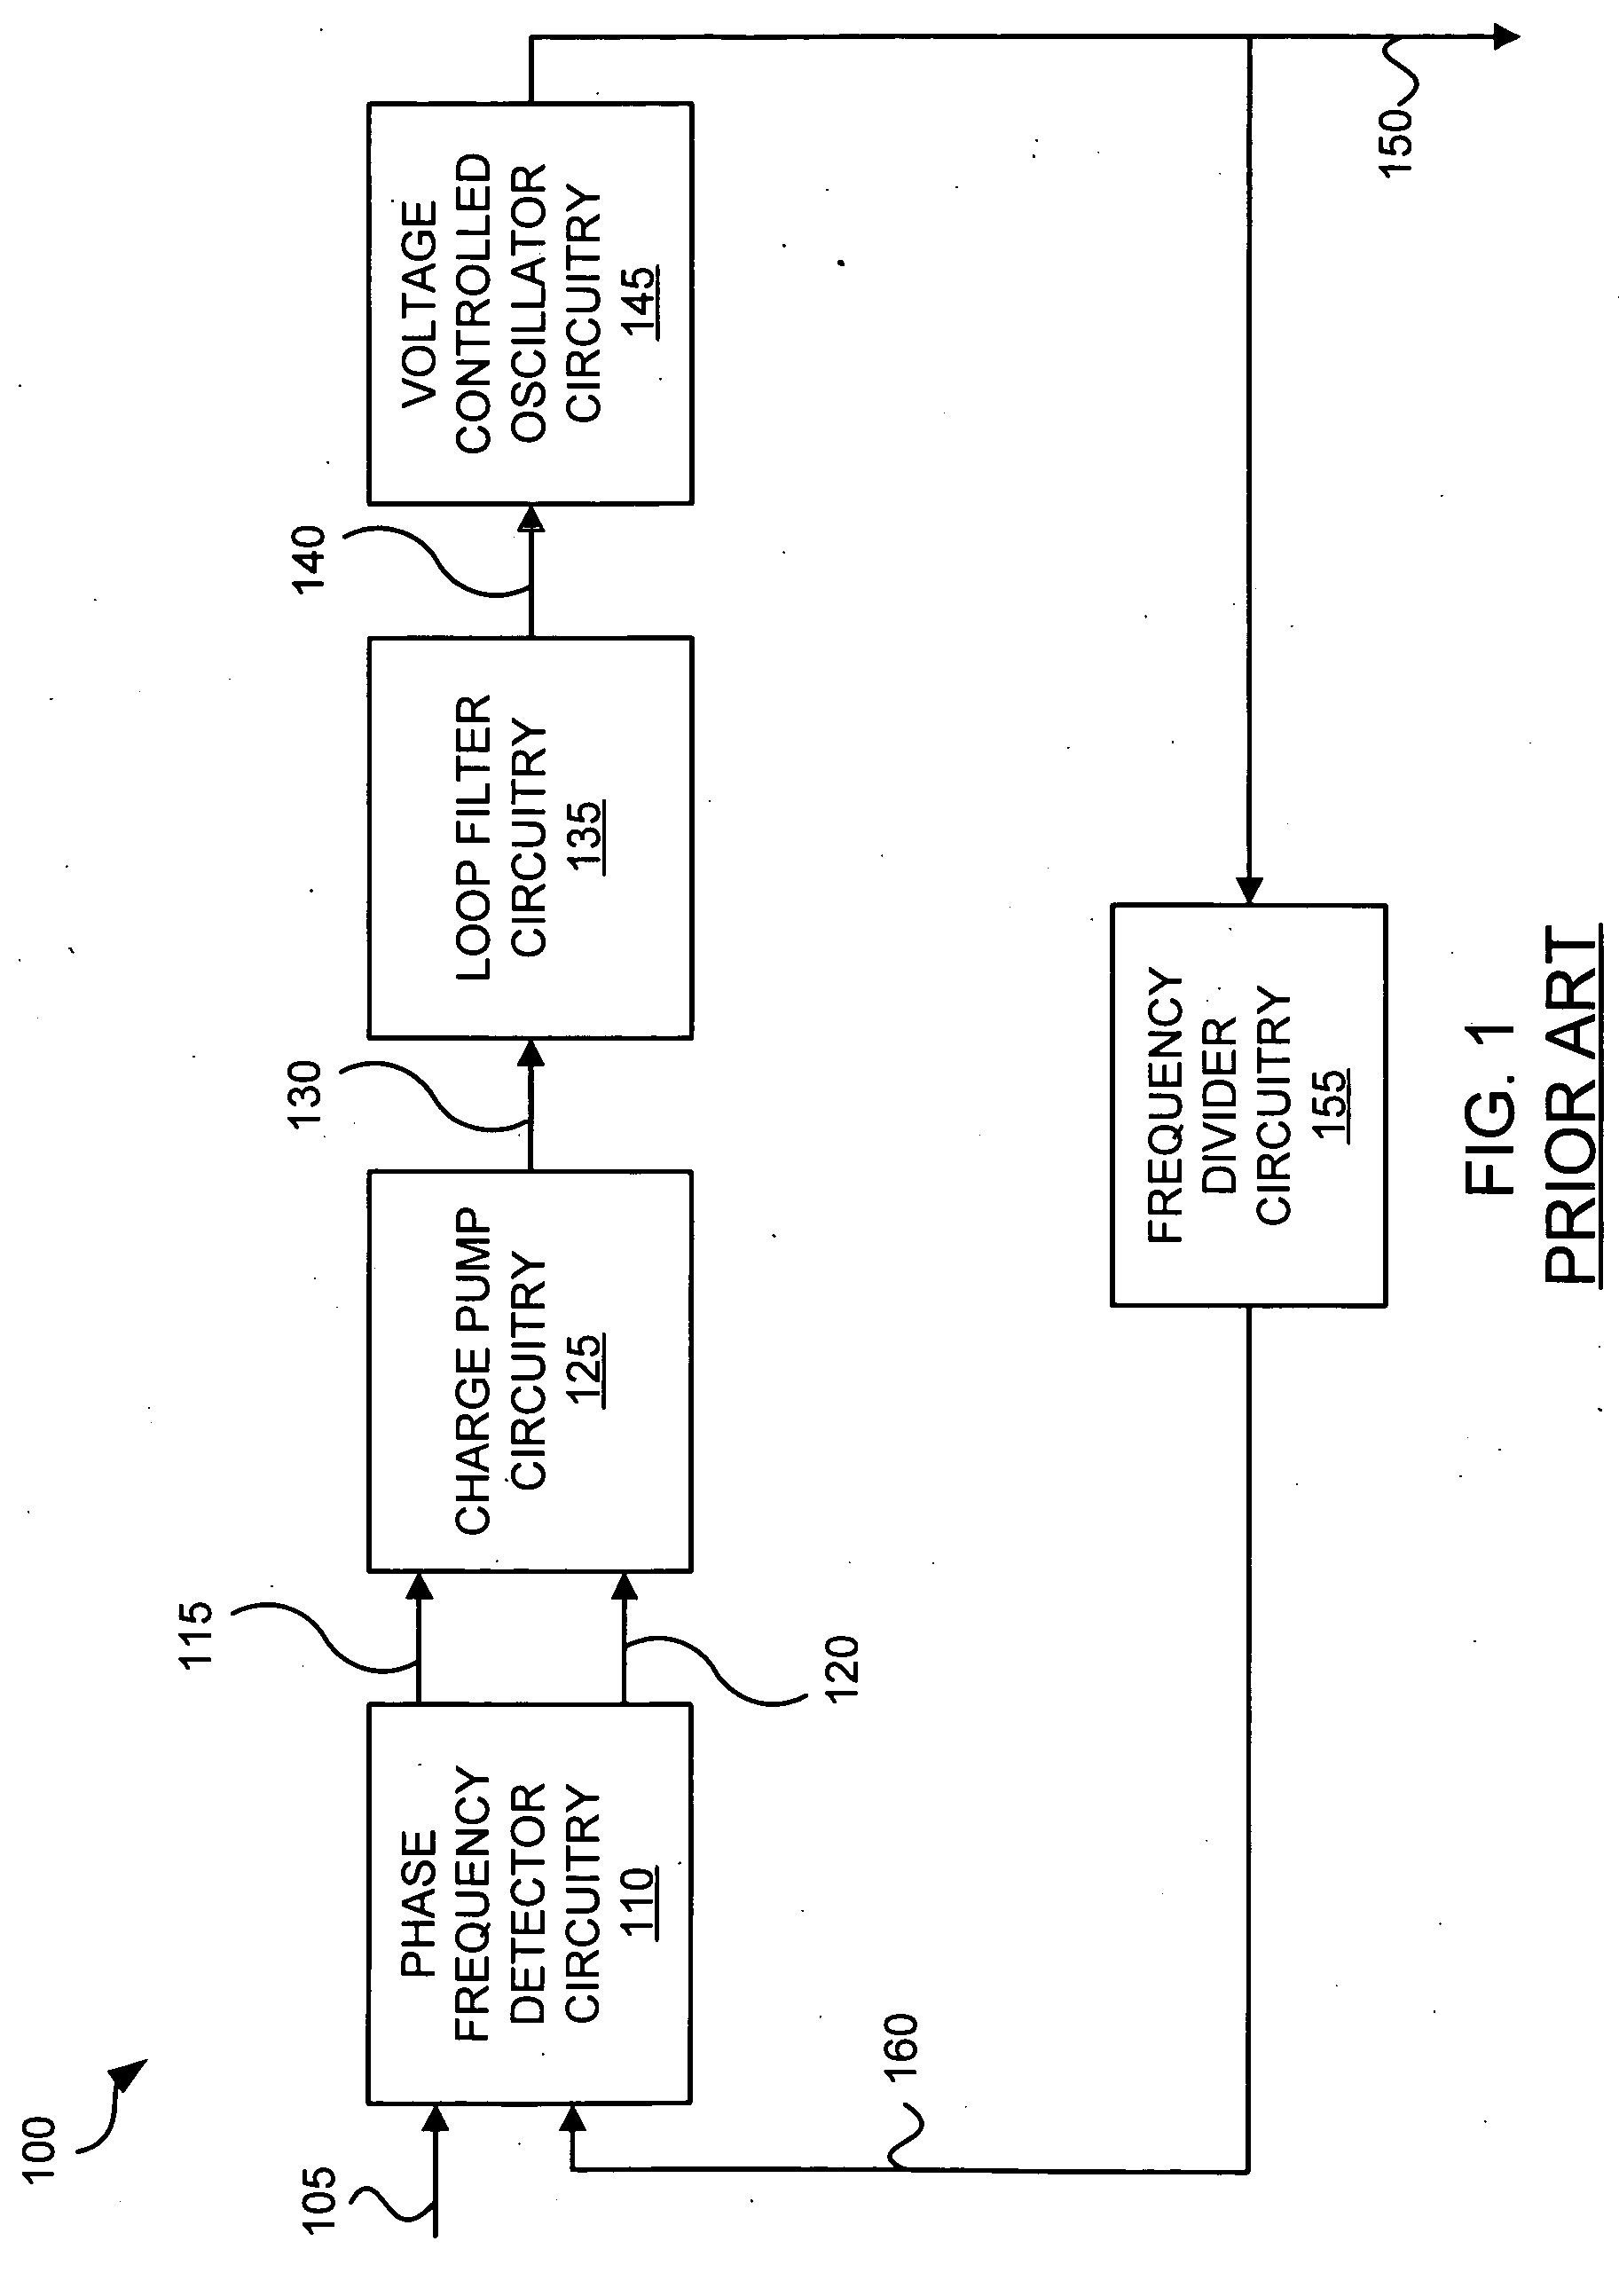 Phase-locked loop circuitry using charge pumps with current mirror circuitry